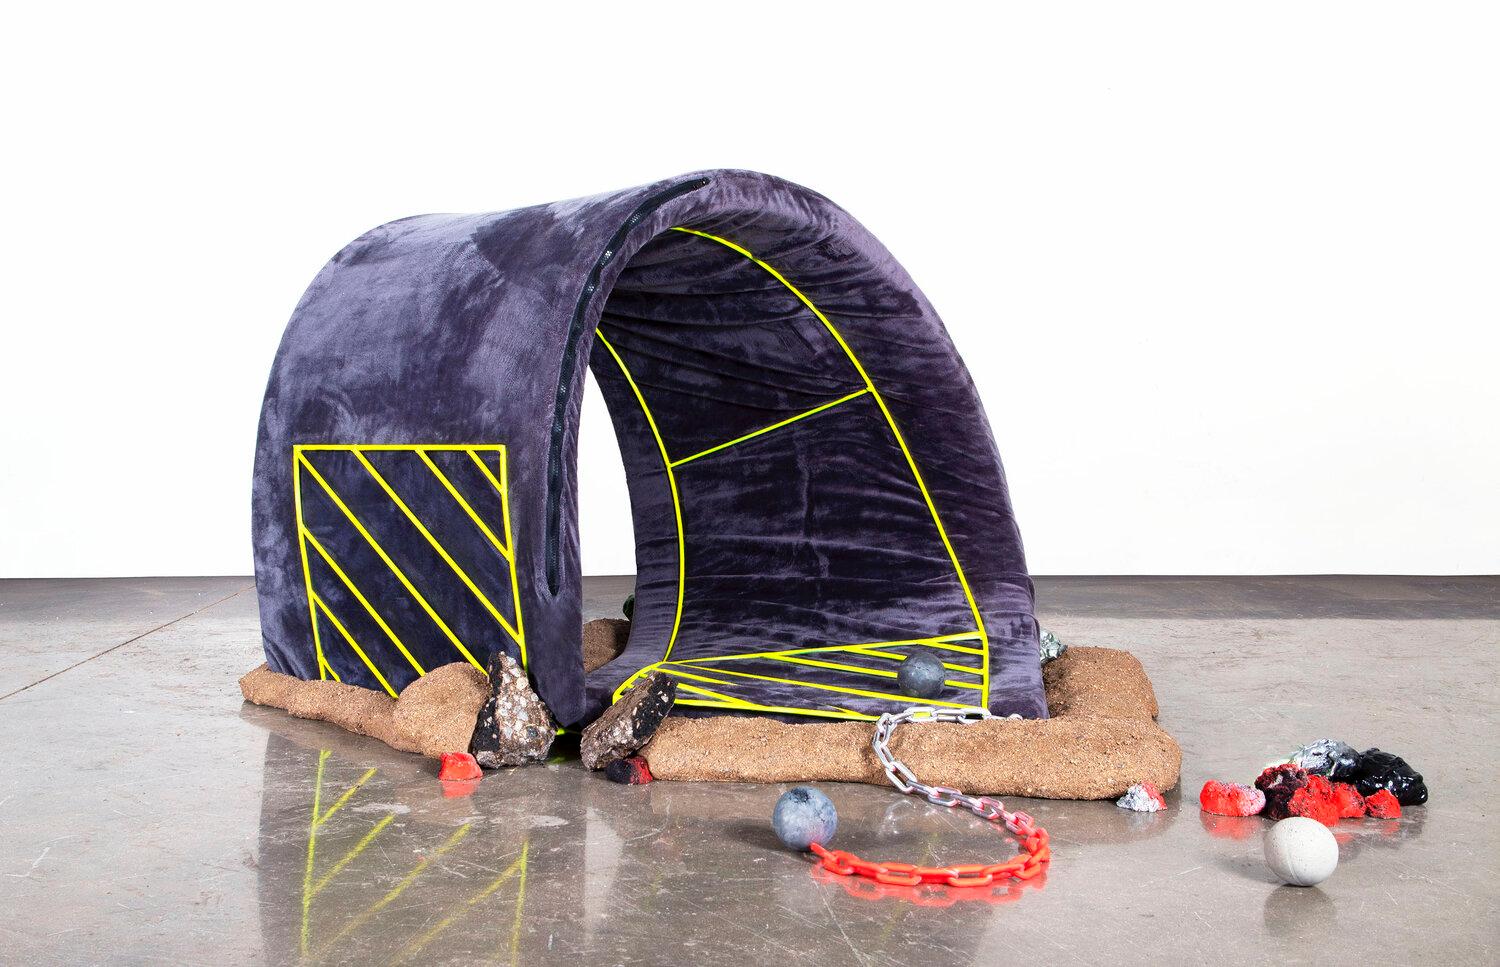 This sculpture by Kenzie Wells was created for an exhibit titled Gradience. A plush roadway bends in an impossible manner, creating a loop. Yellow lines designate parking spaces on this surrealist road. Small 